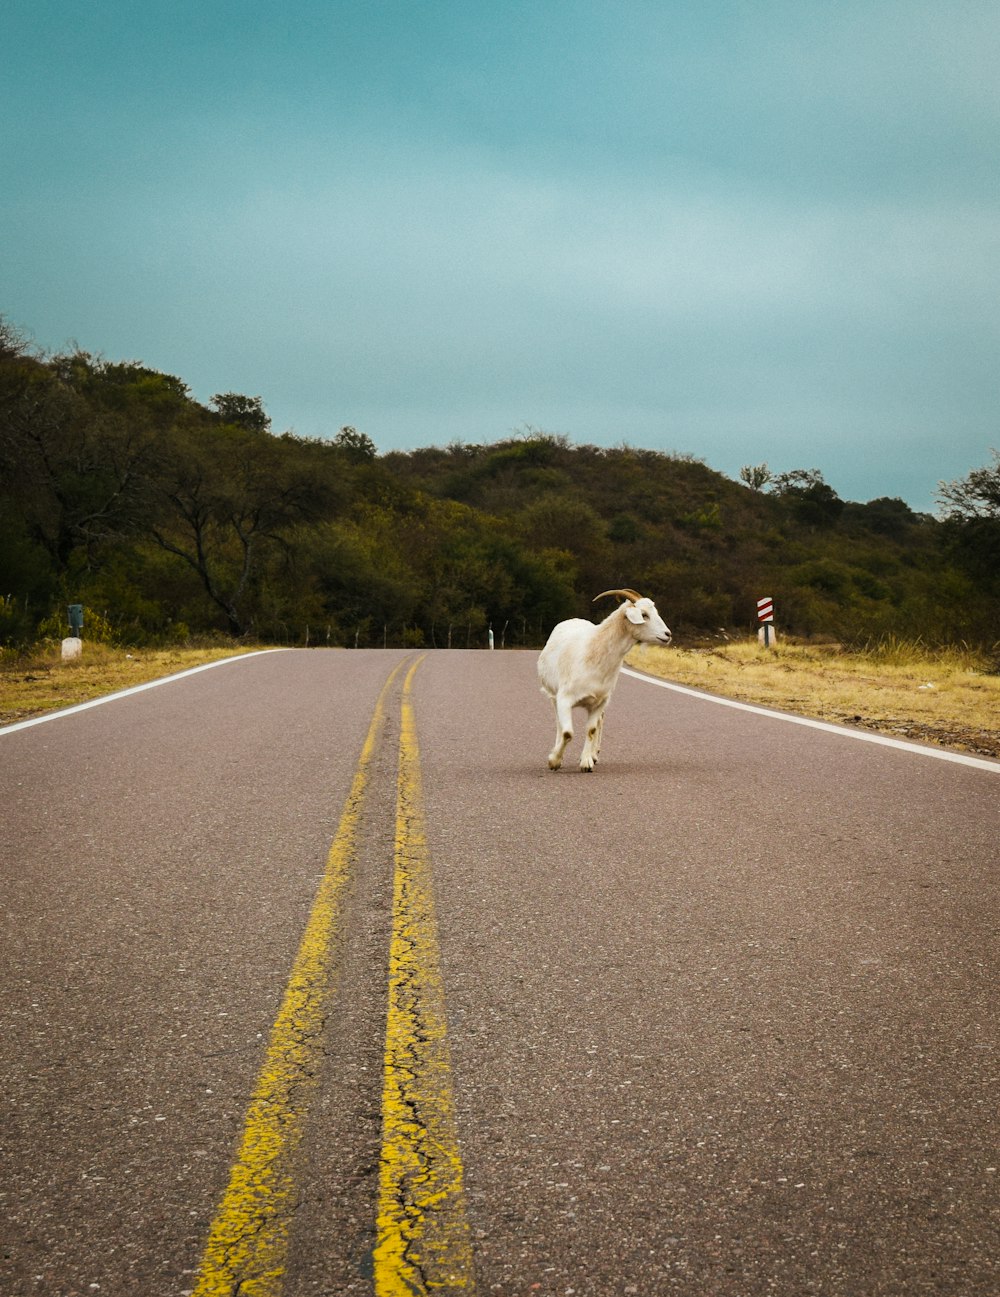 a white goat standing on a road